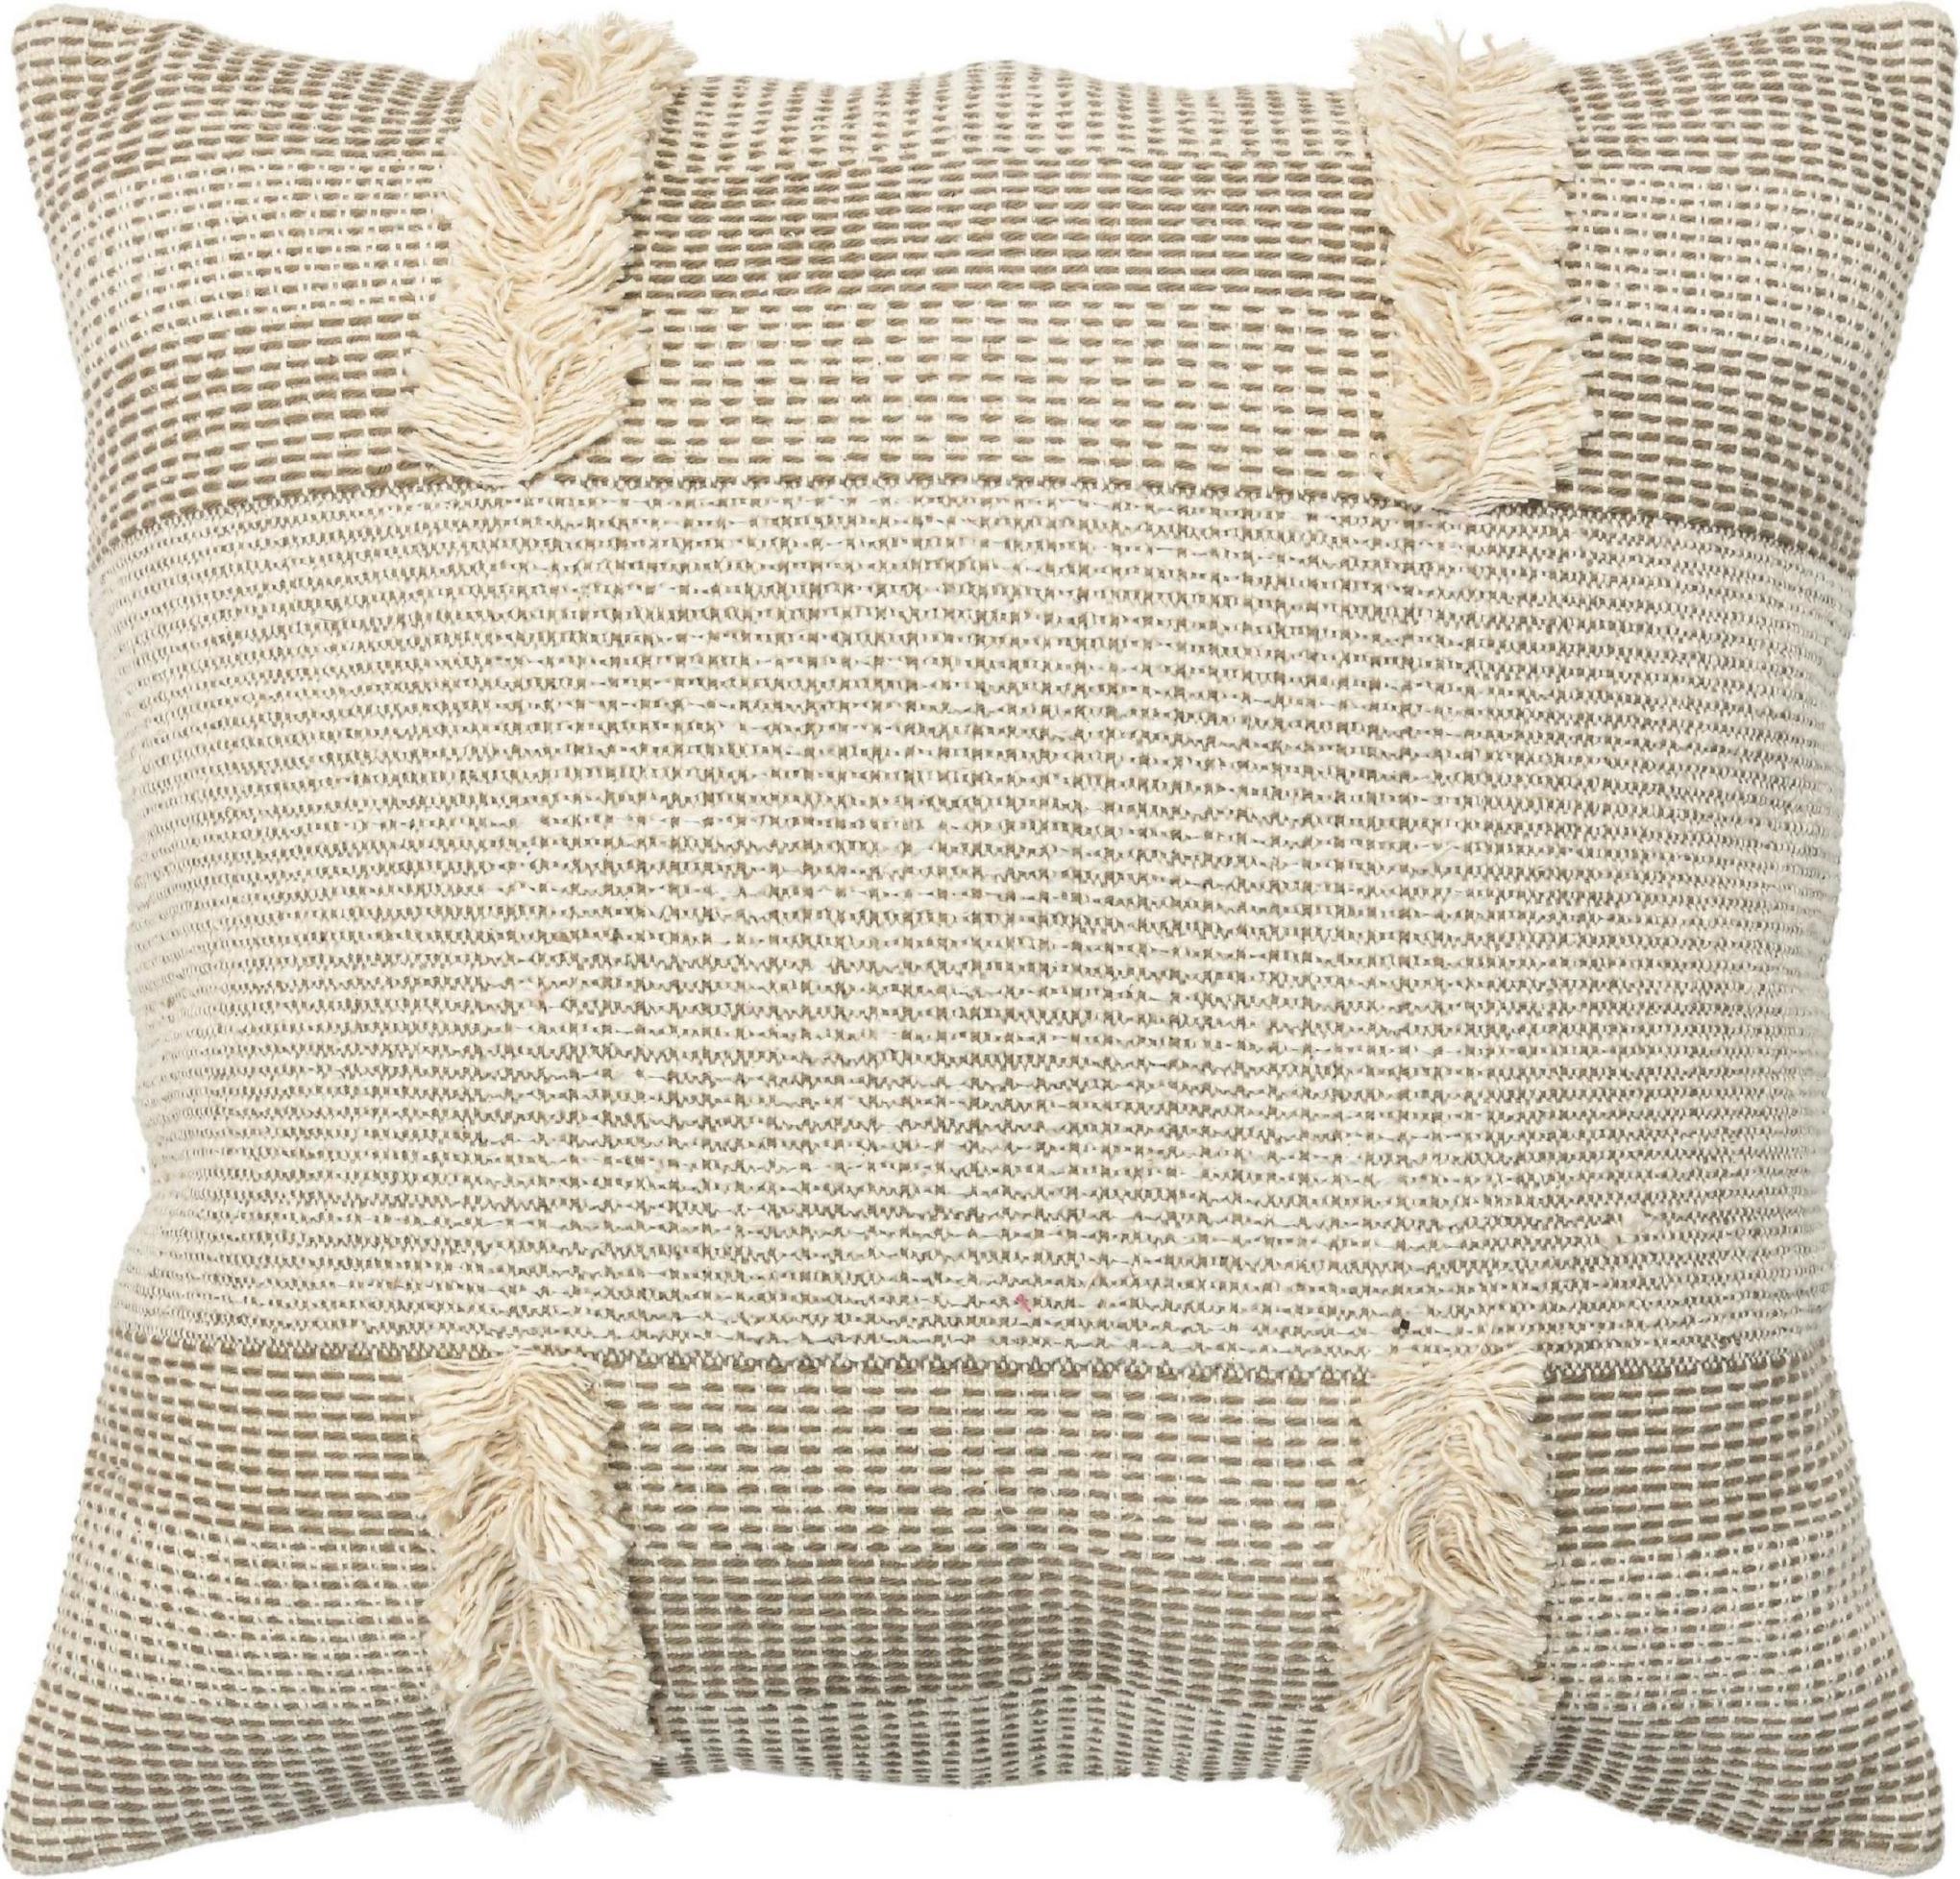 Modern Beige Boho Chic Style Contemporary Wool and Cotton Pillow For Sale